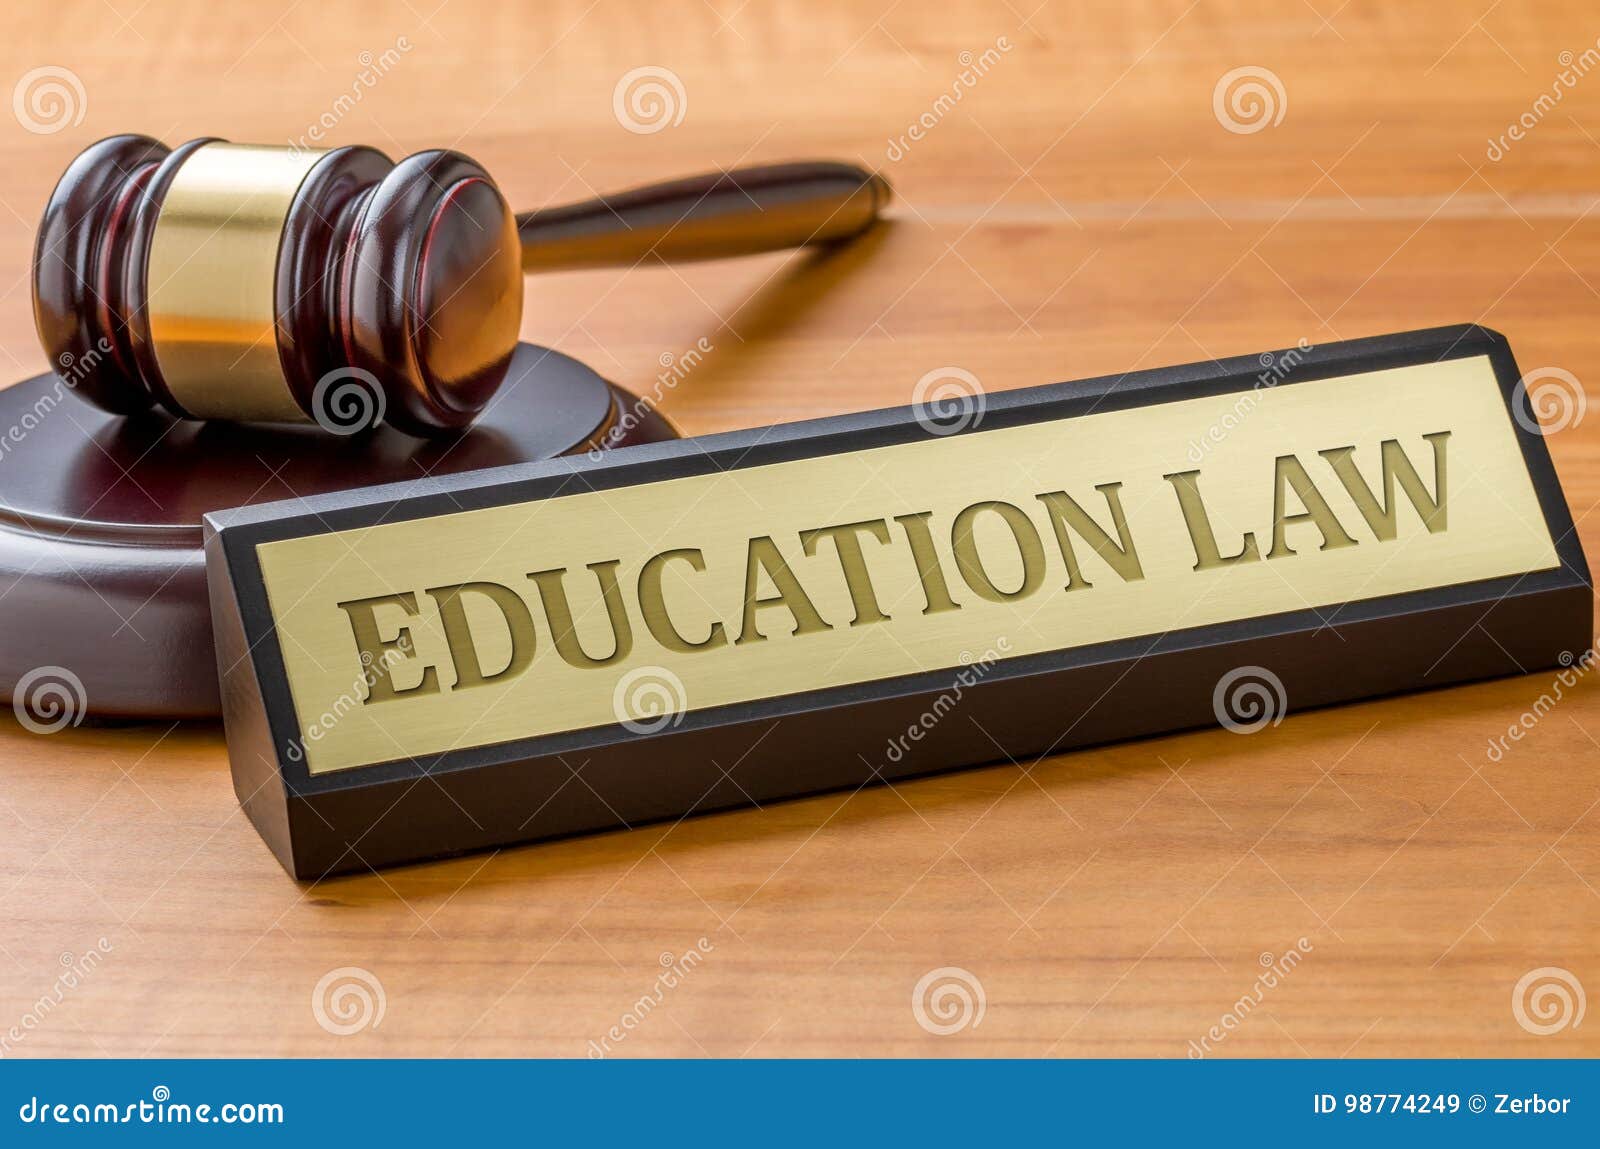 education law article 131 section 6526